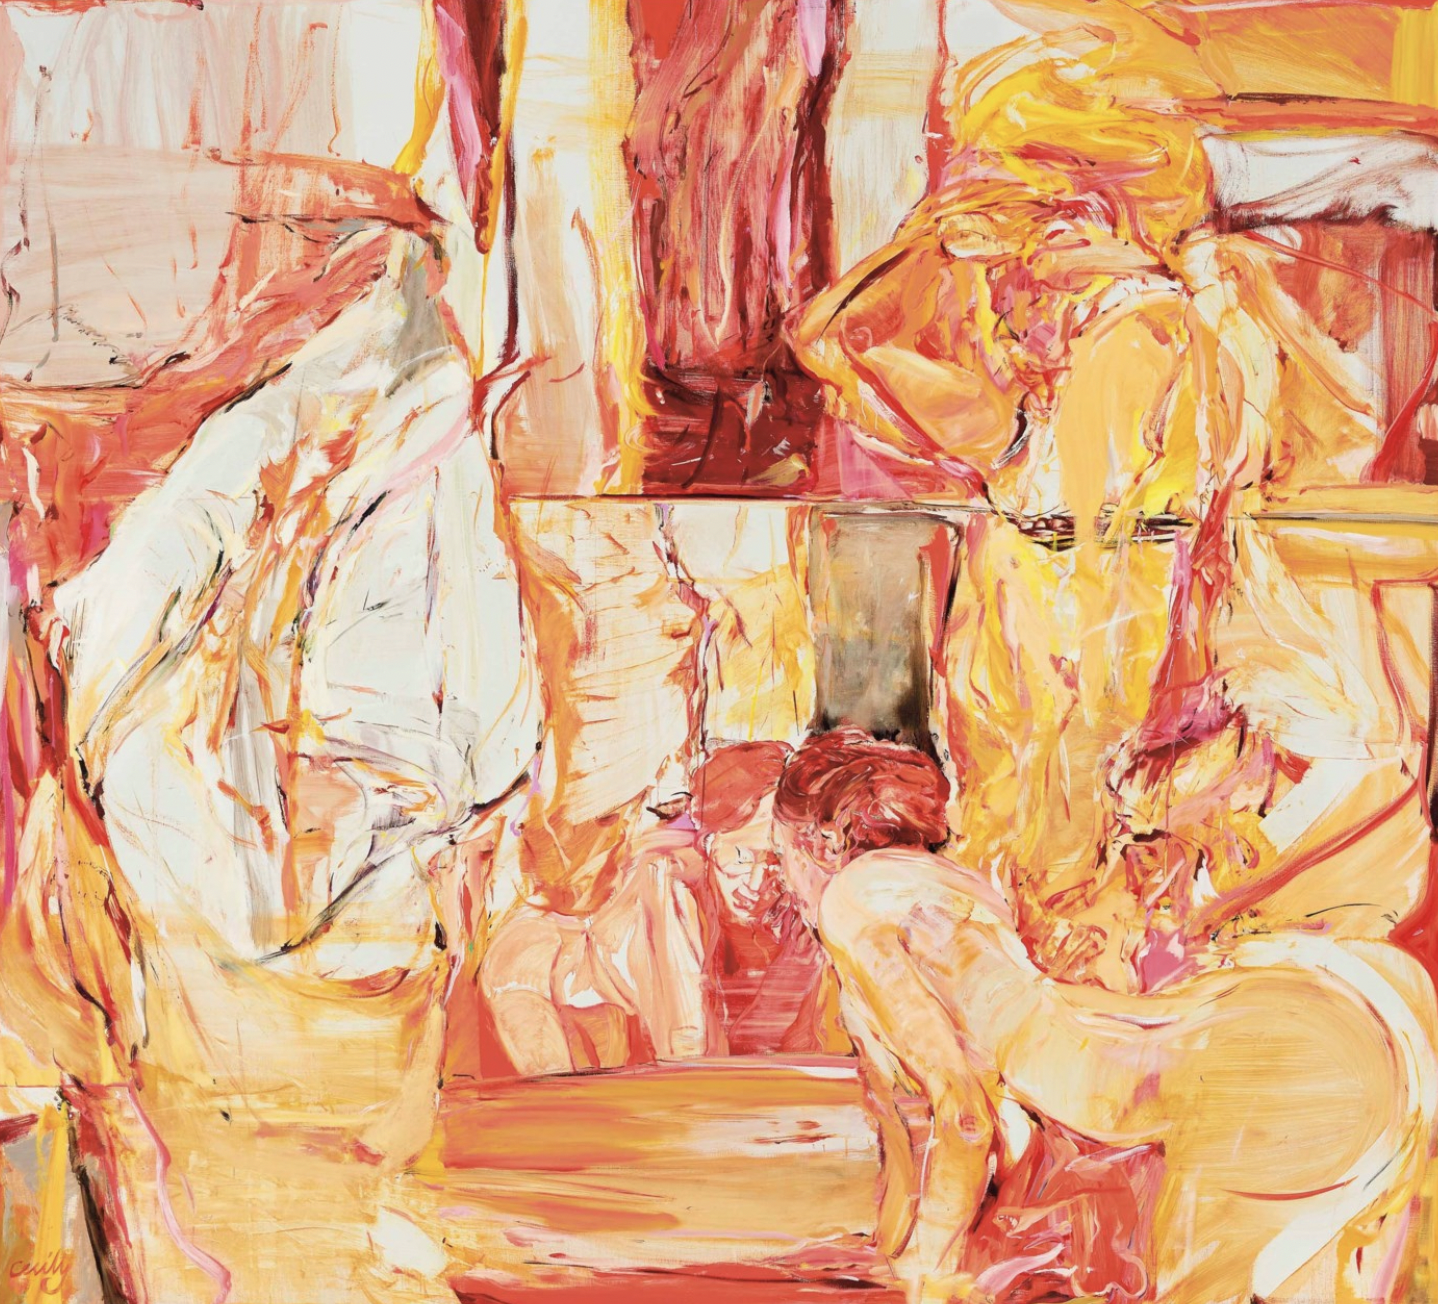 Cecily Brown's Girl Trouble (1999)